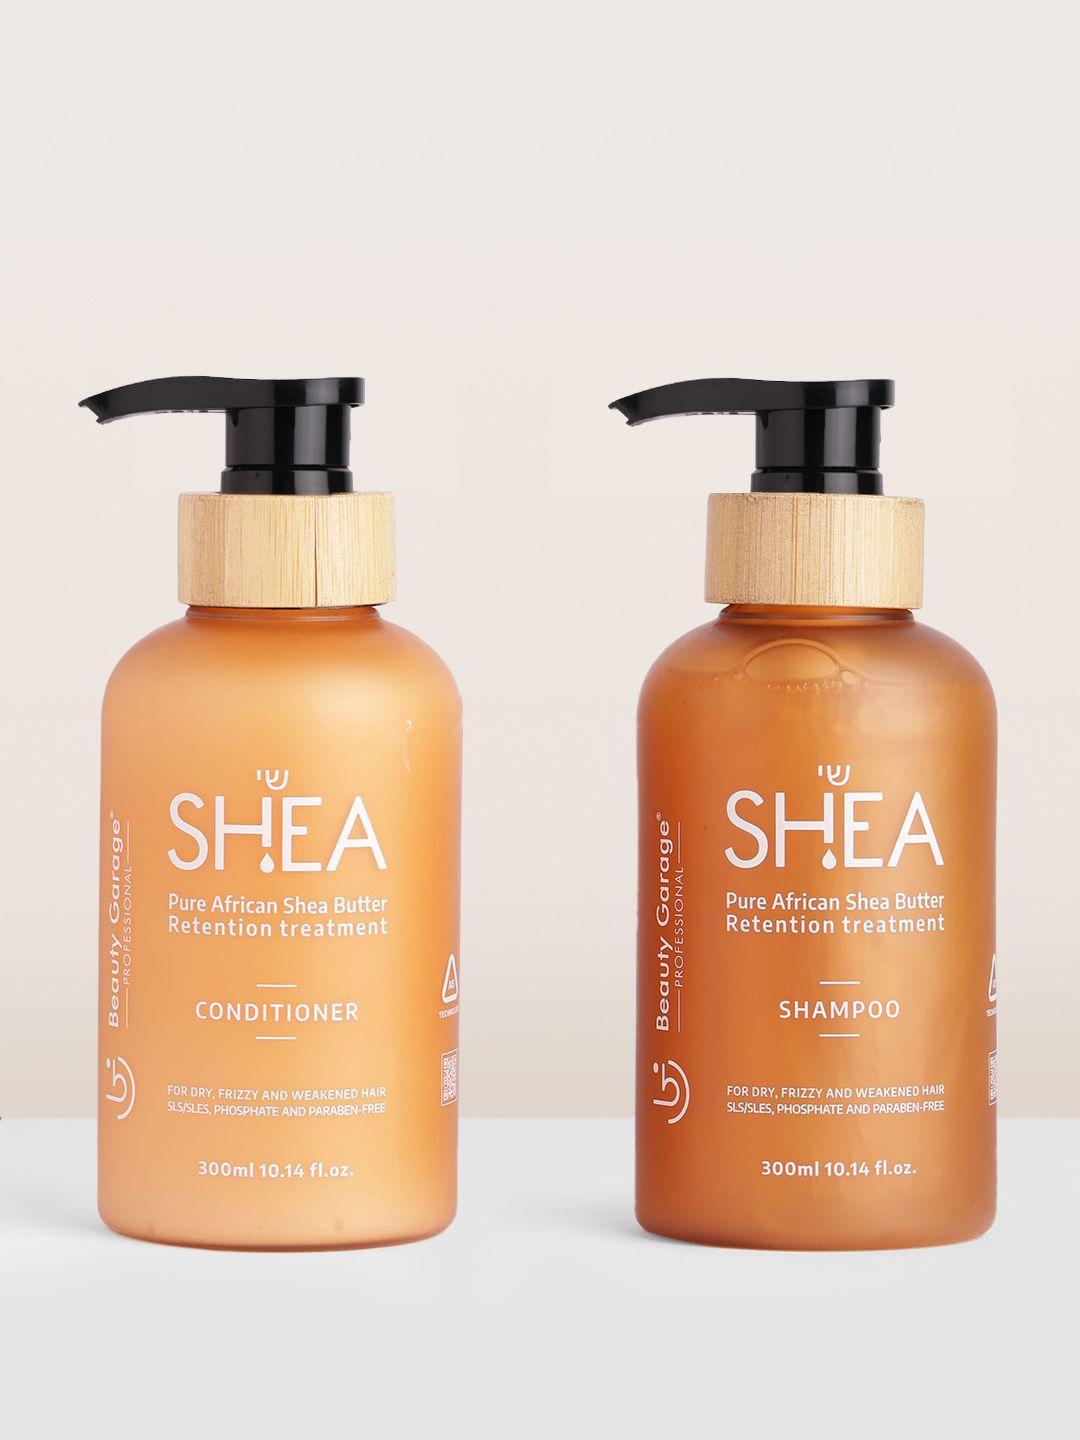 beauty garage shea butter retention treatment shampoo with conditioner - 300 ml each